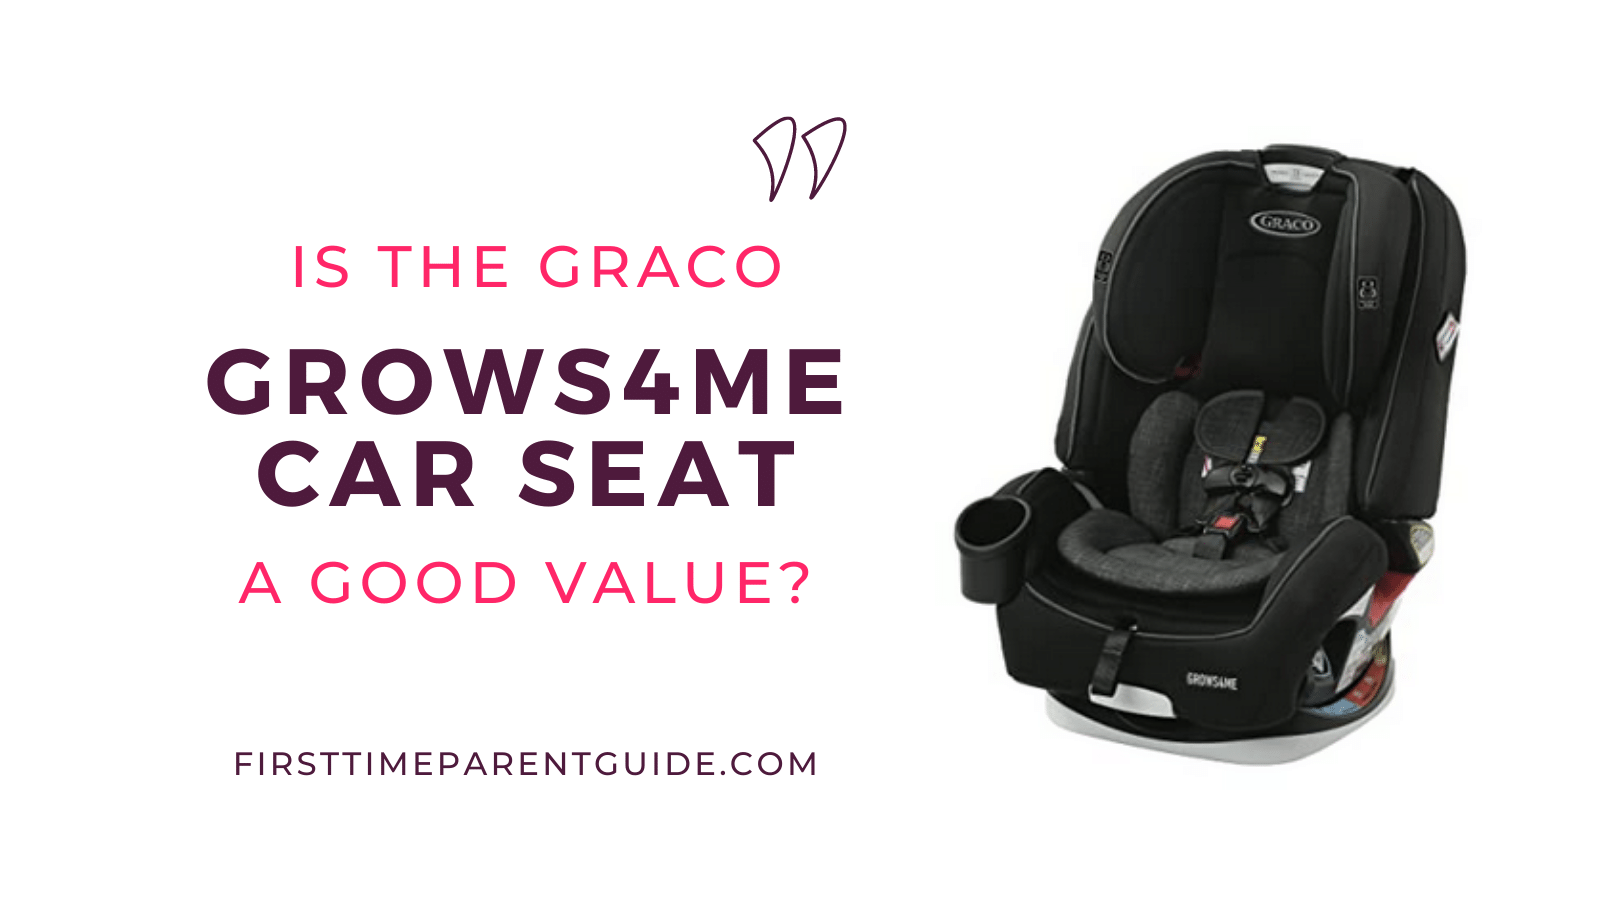 The Graco Grows4me 4 in 1 Car Seat